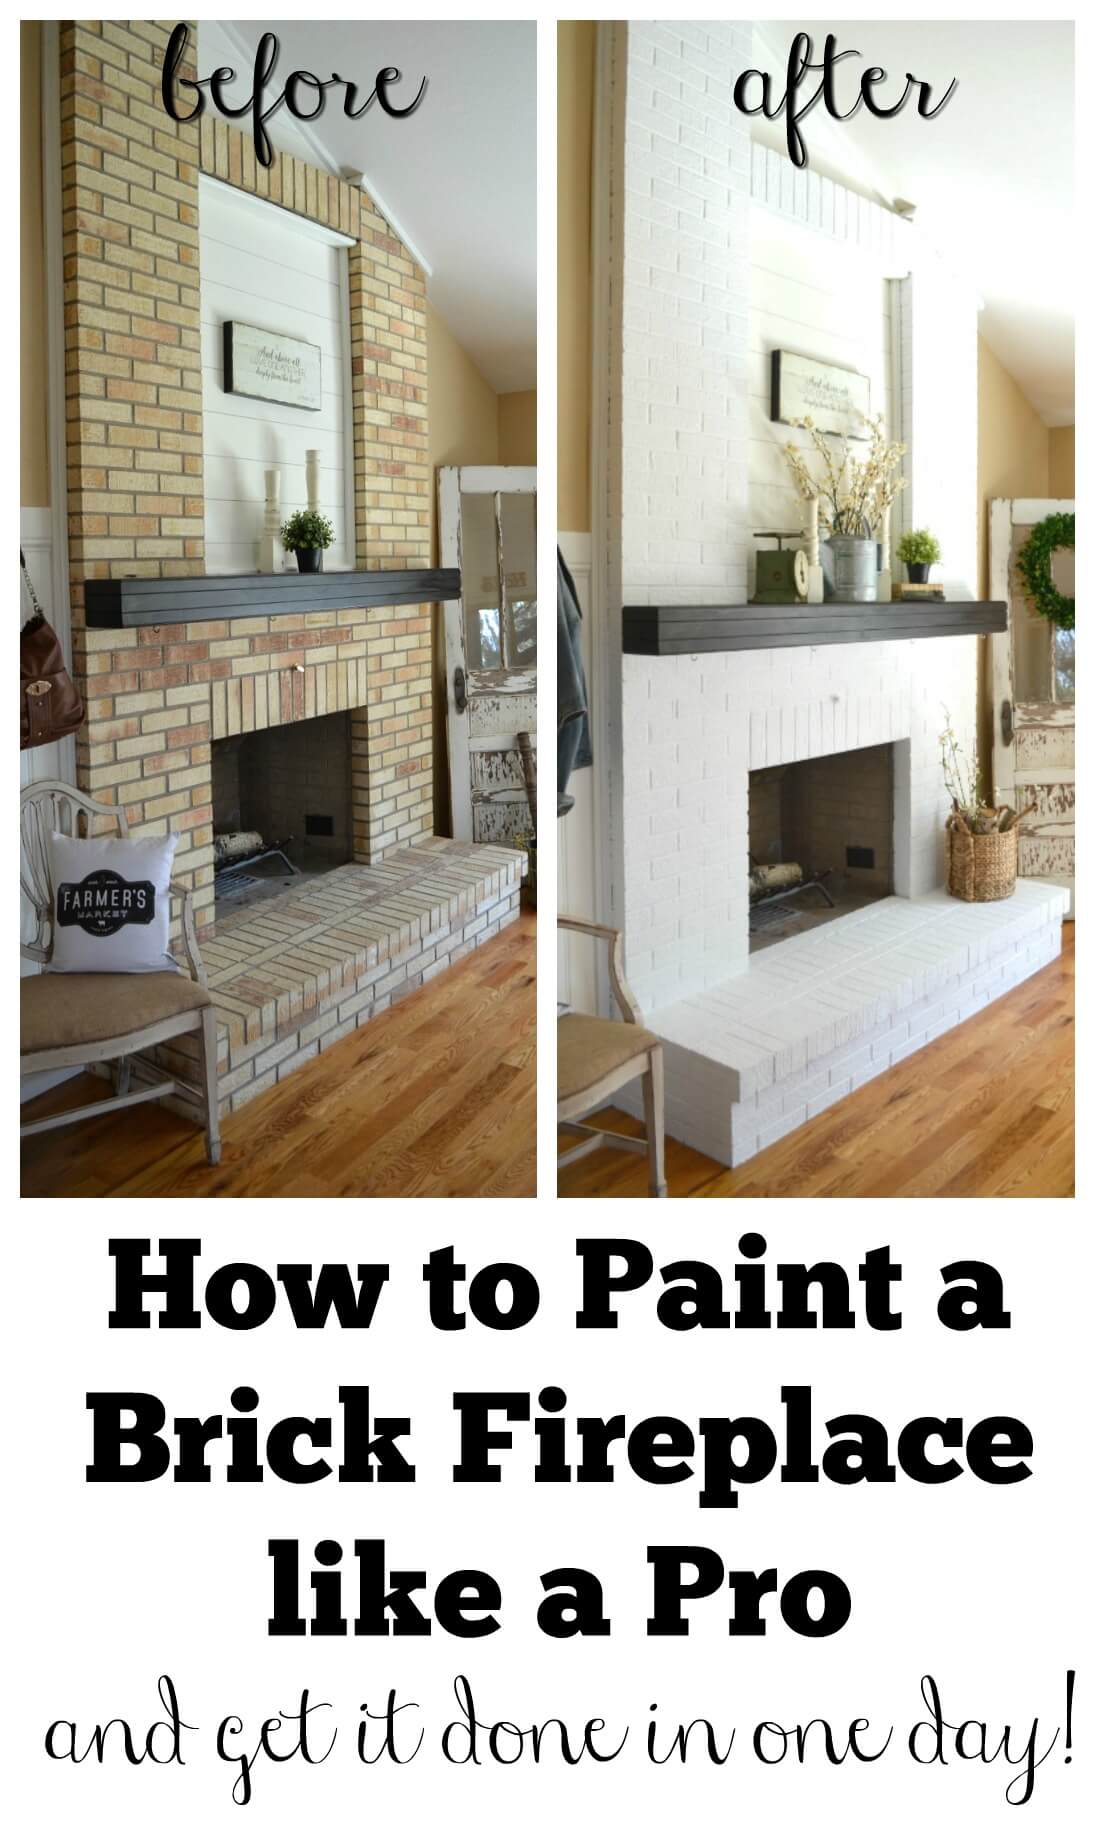 The One-Day Fireplace Makeover Hack